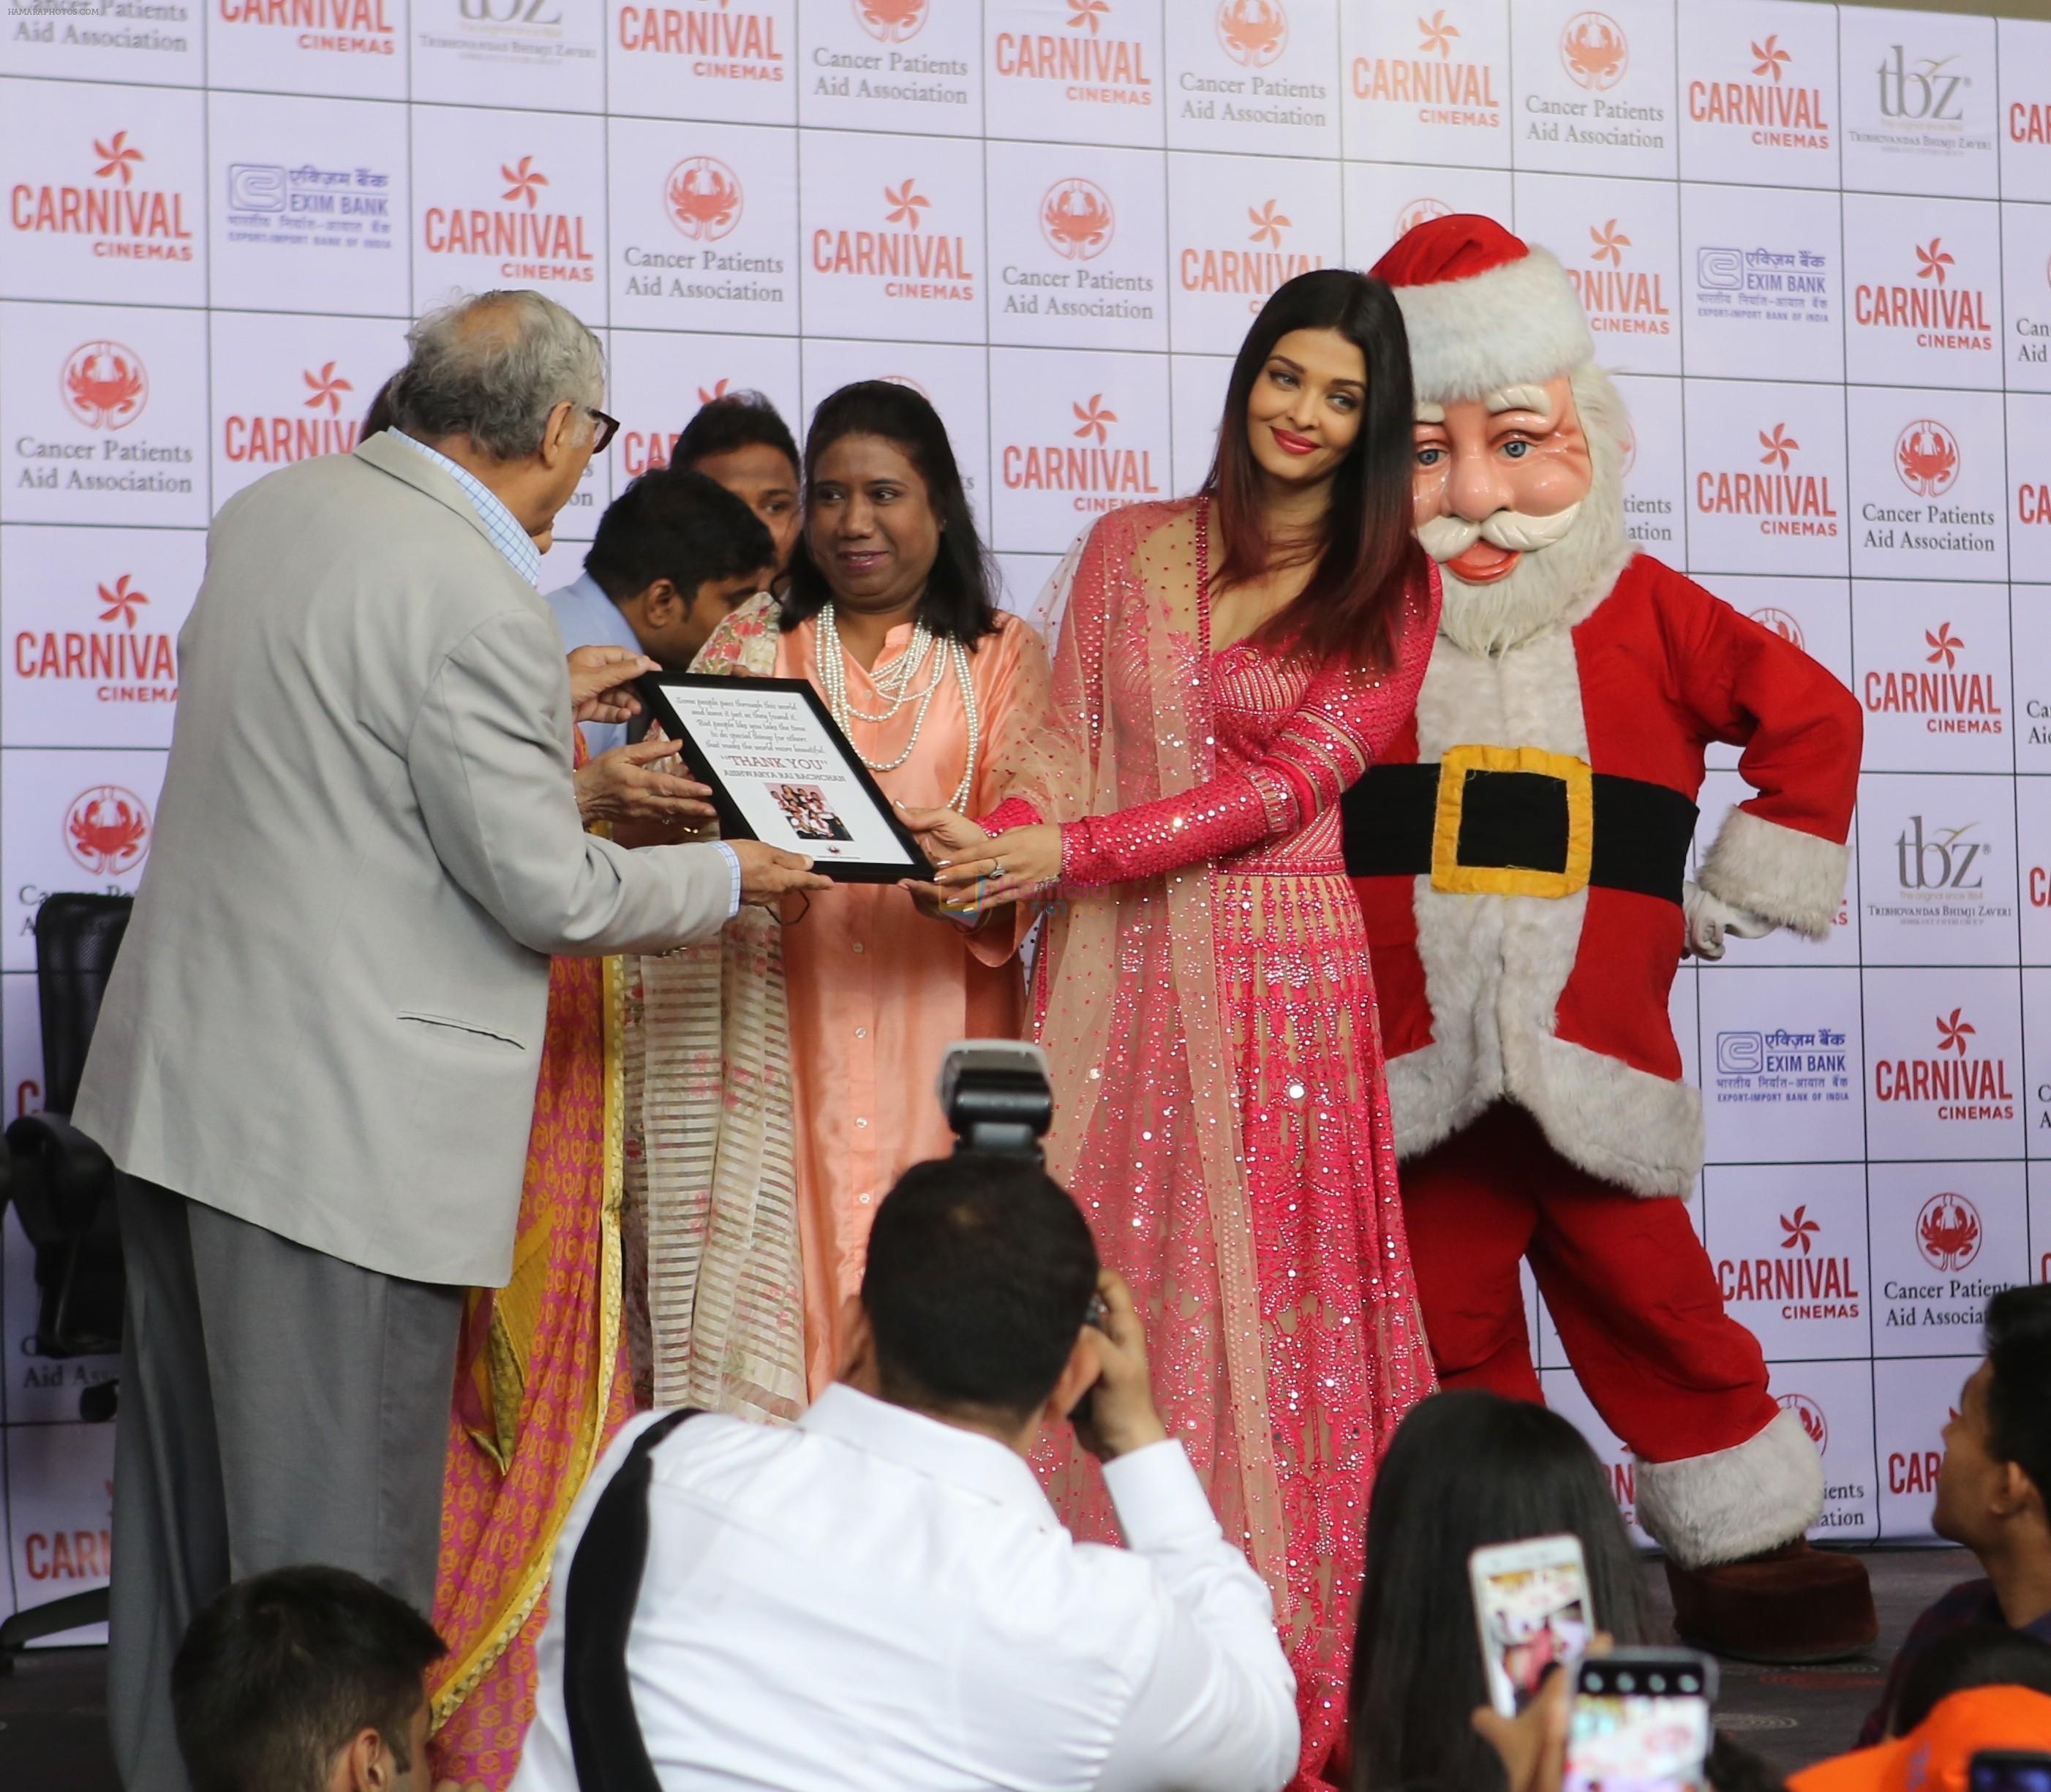 Aishwarya Rai Bachchan celebrates Christmas with Cancer patients in Carnival cinemas in Wadala on 25th Dec 2018